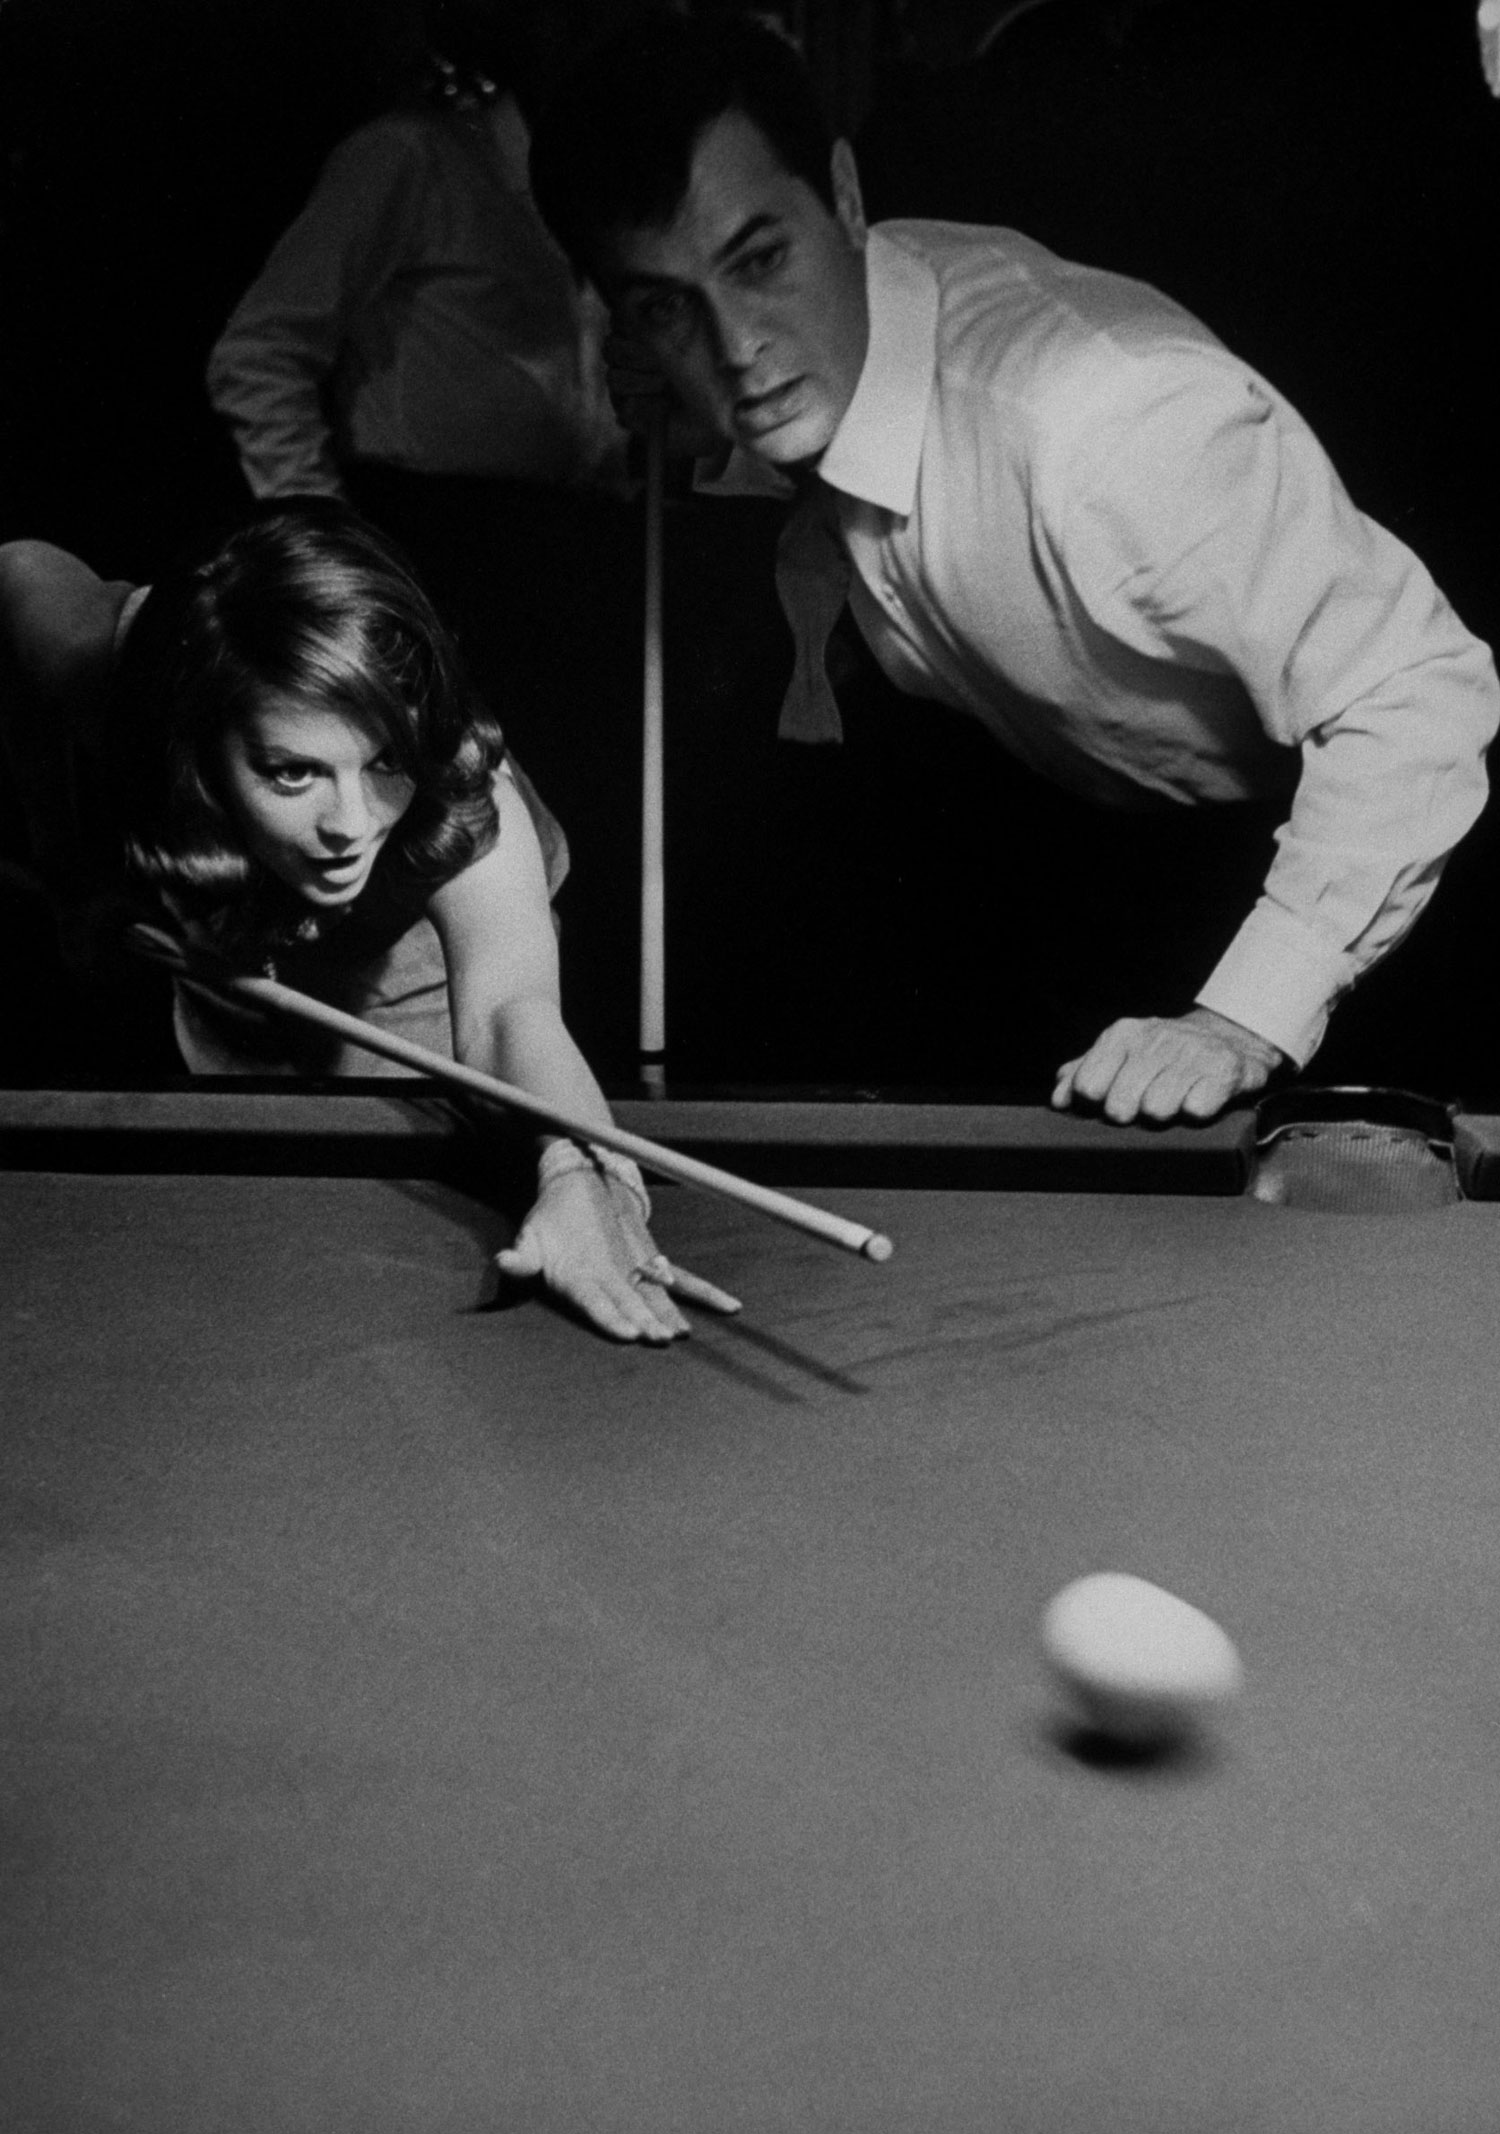 Natalie Wood learns to play billiards with Tony Curtis, 1963.